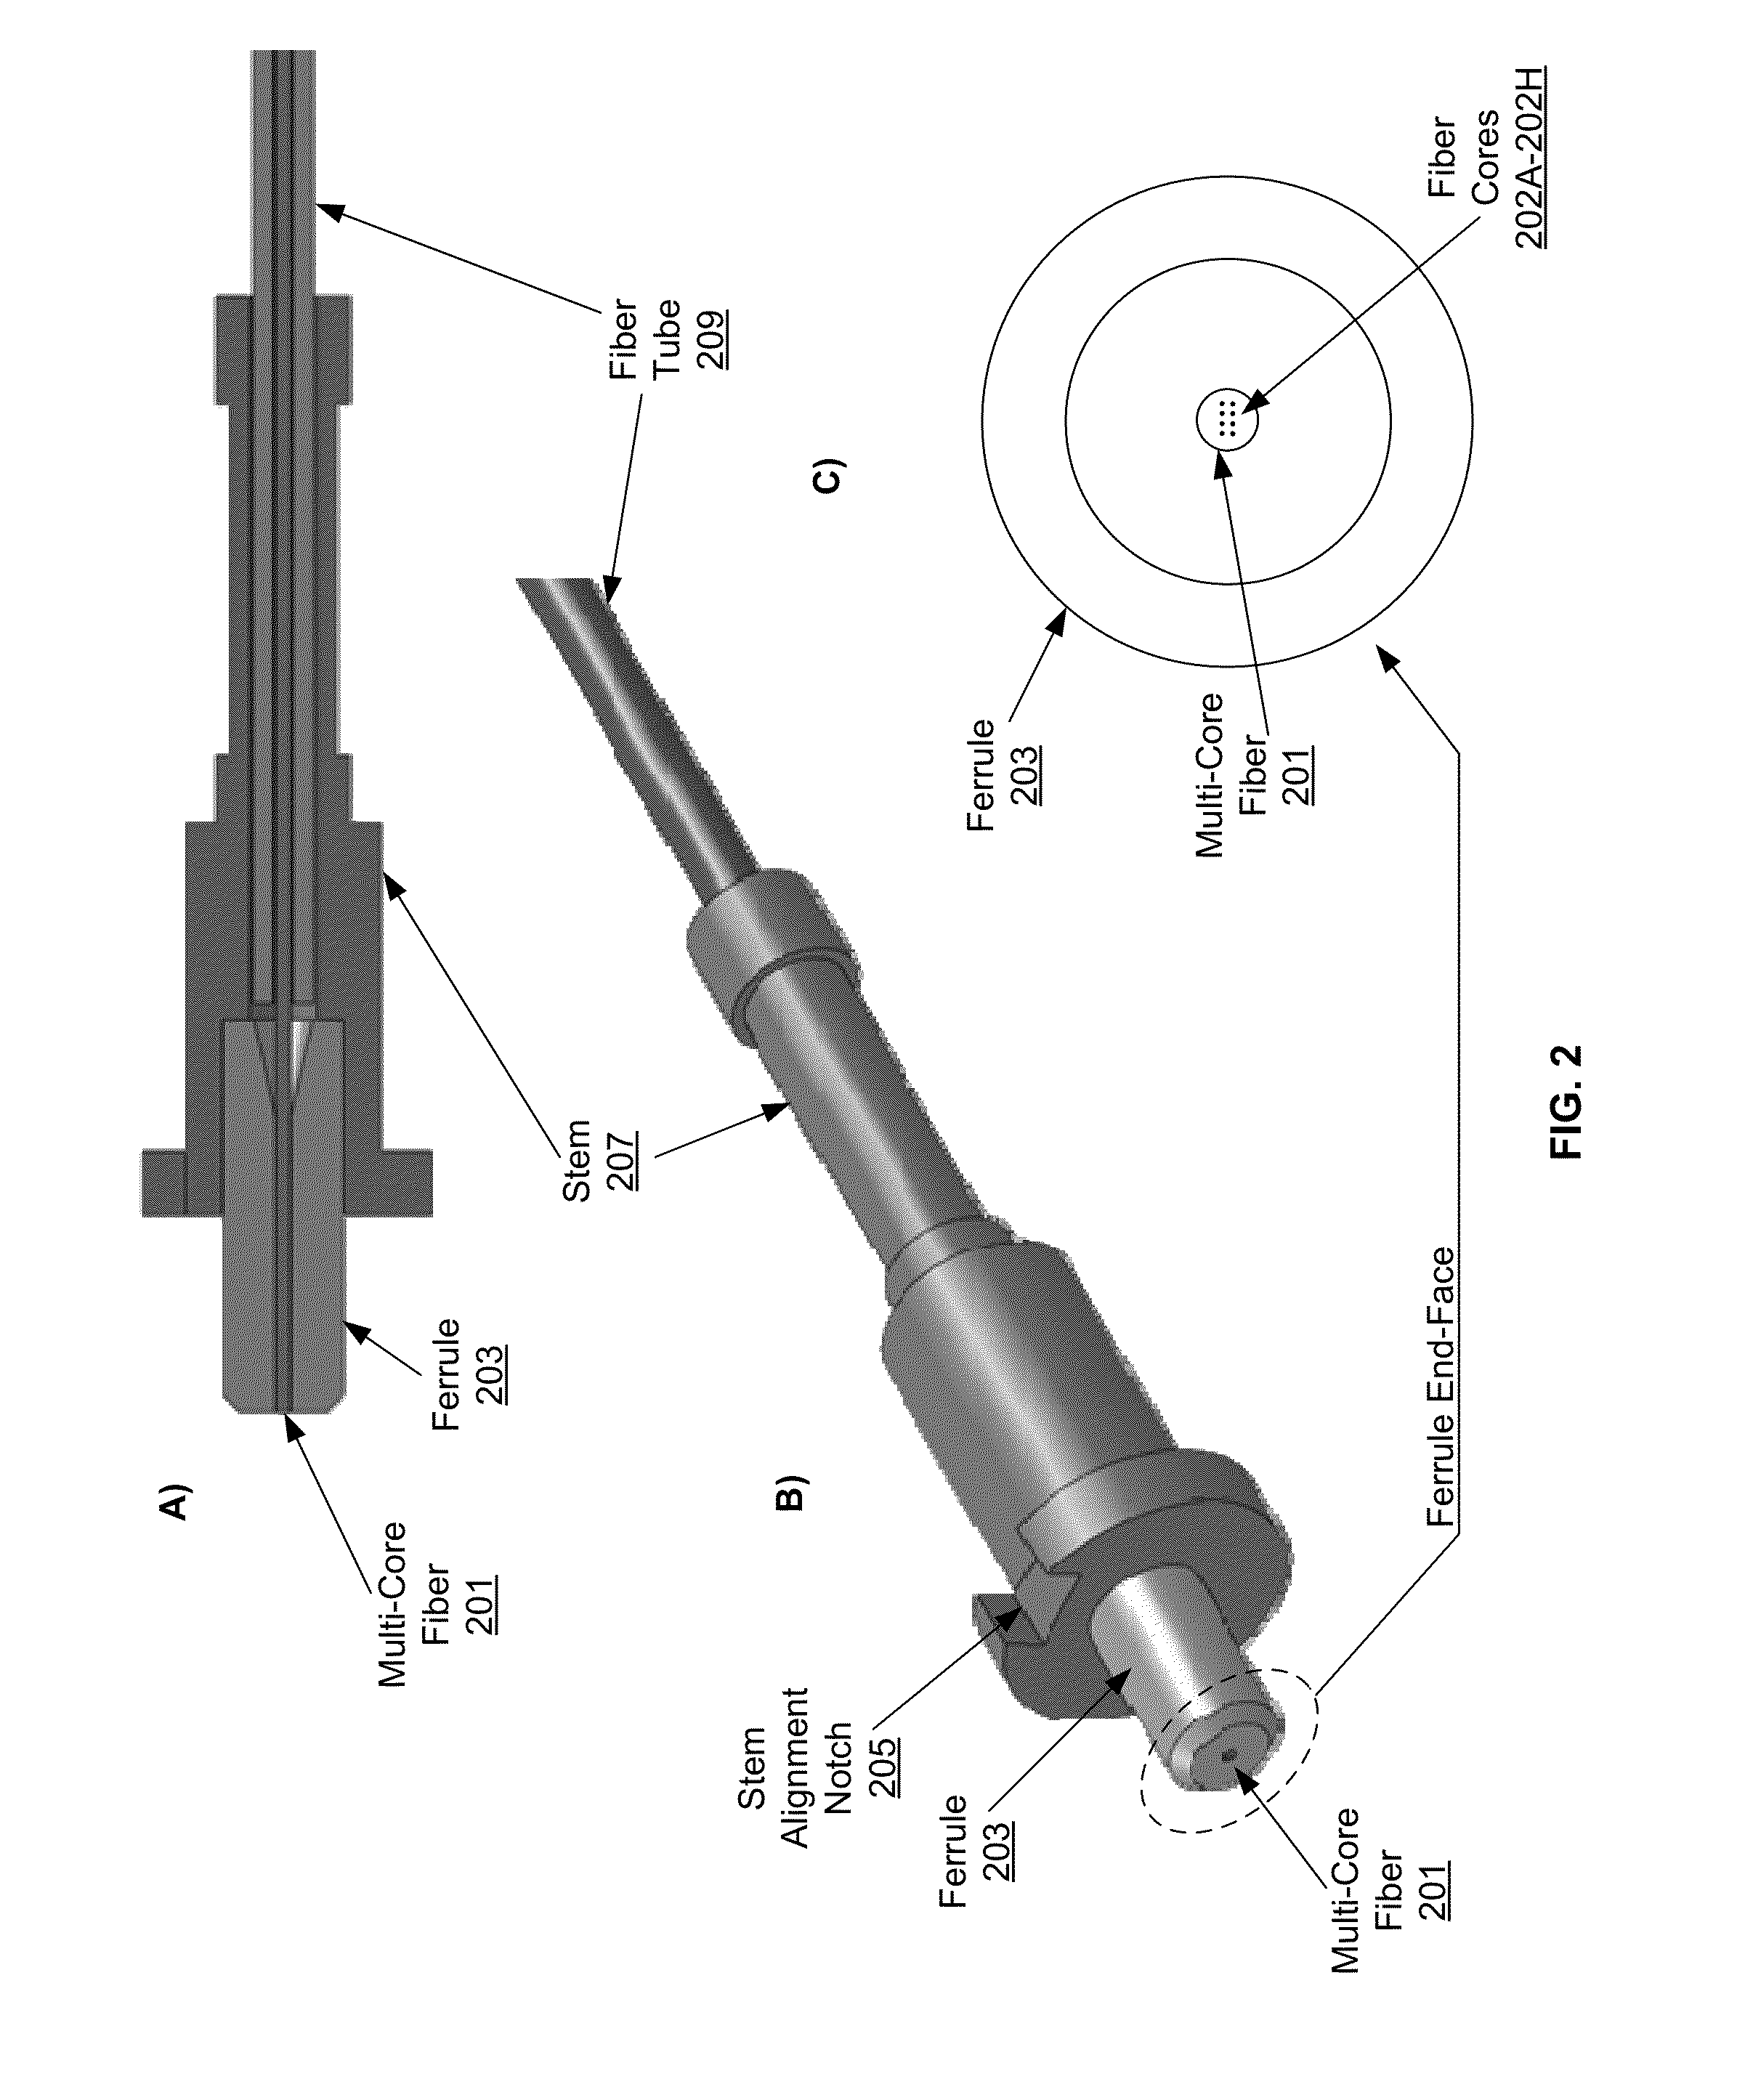 Method And System For A Multi-Core Fiber Connector